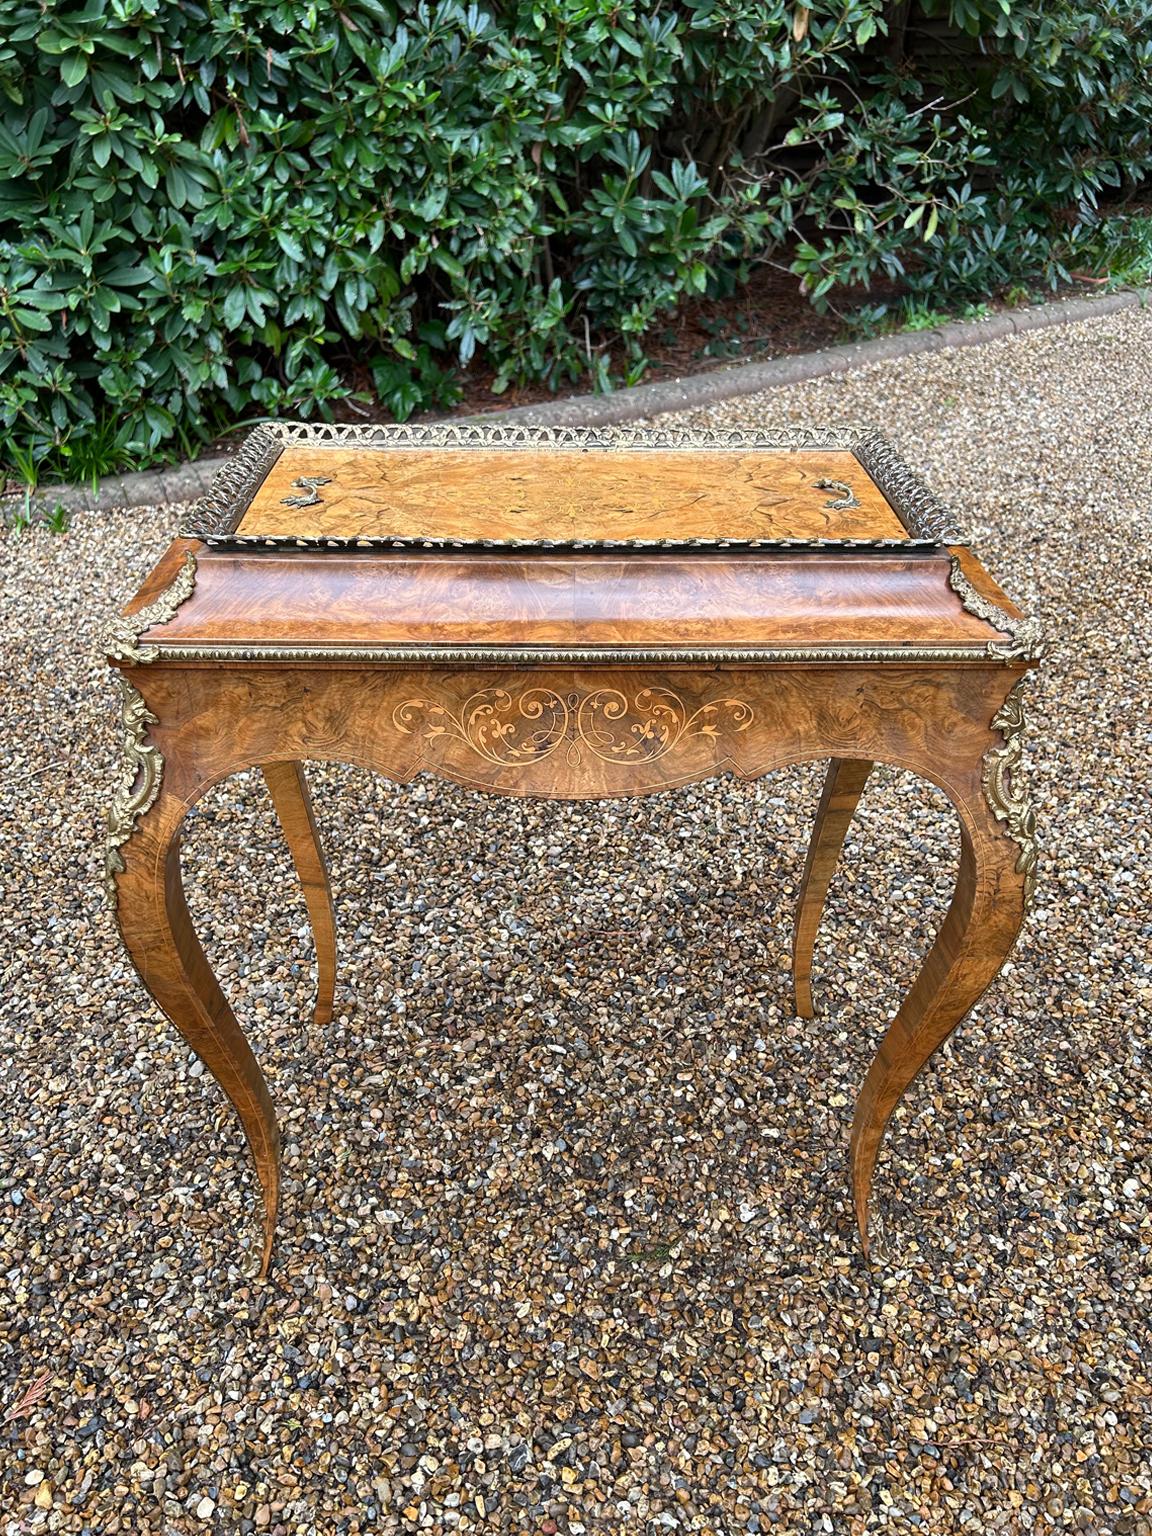 A very rare highly decorative and superb quality 19th century freestanding Burr Walnut and Marquetry French Jardiniere/planter/cooler, the rectangular lift up lid to reveal a metal liner inside, the top of the lid is inlaid and has ormolu mounted